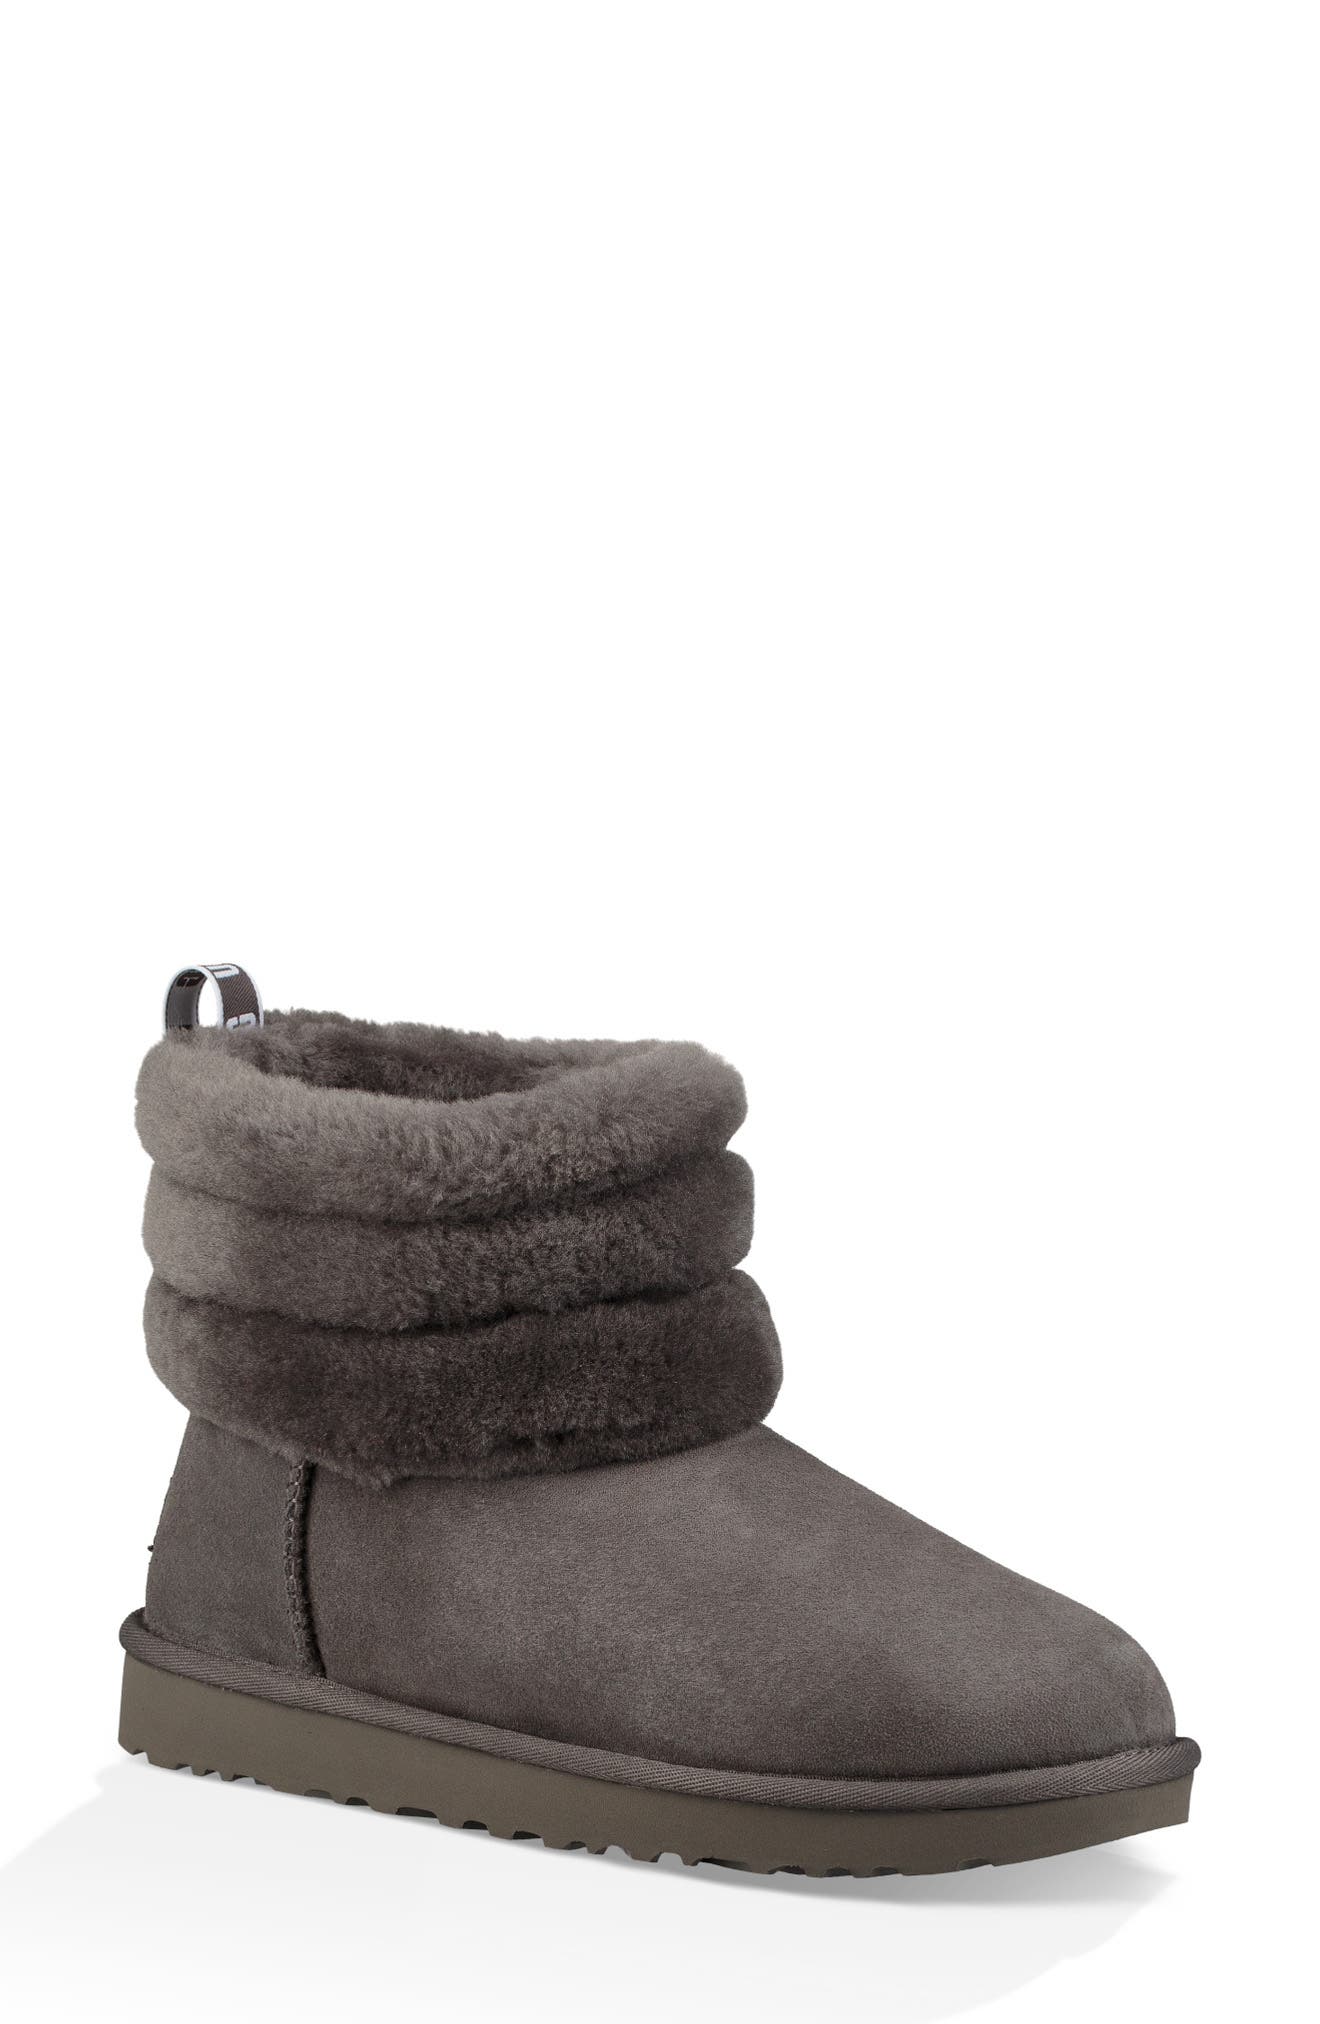 uggs classic mini fluff quilted boot